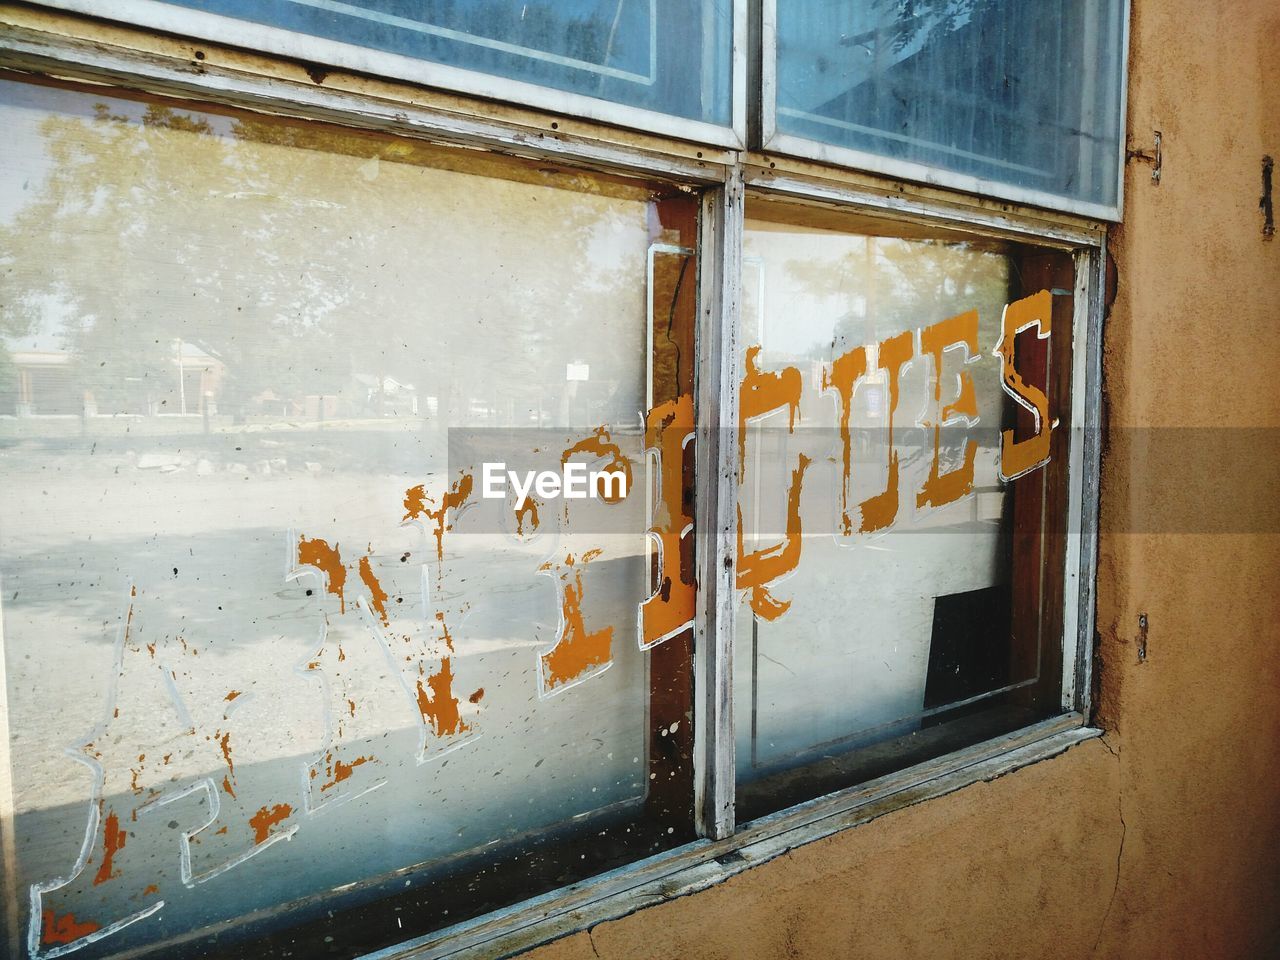 Text on glass window of building